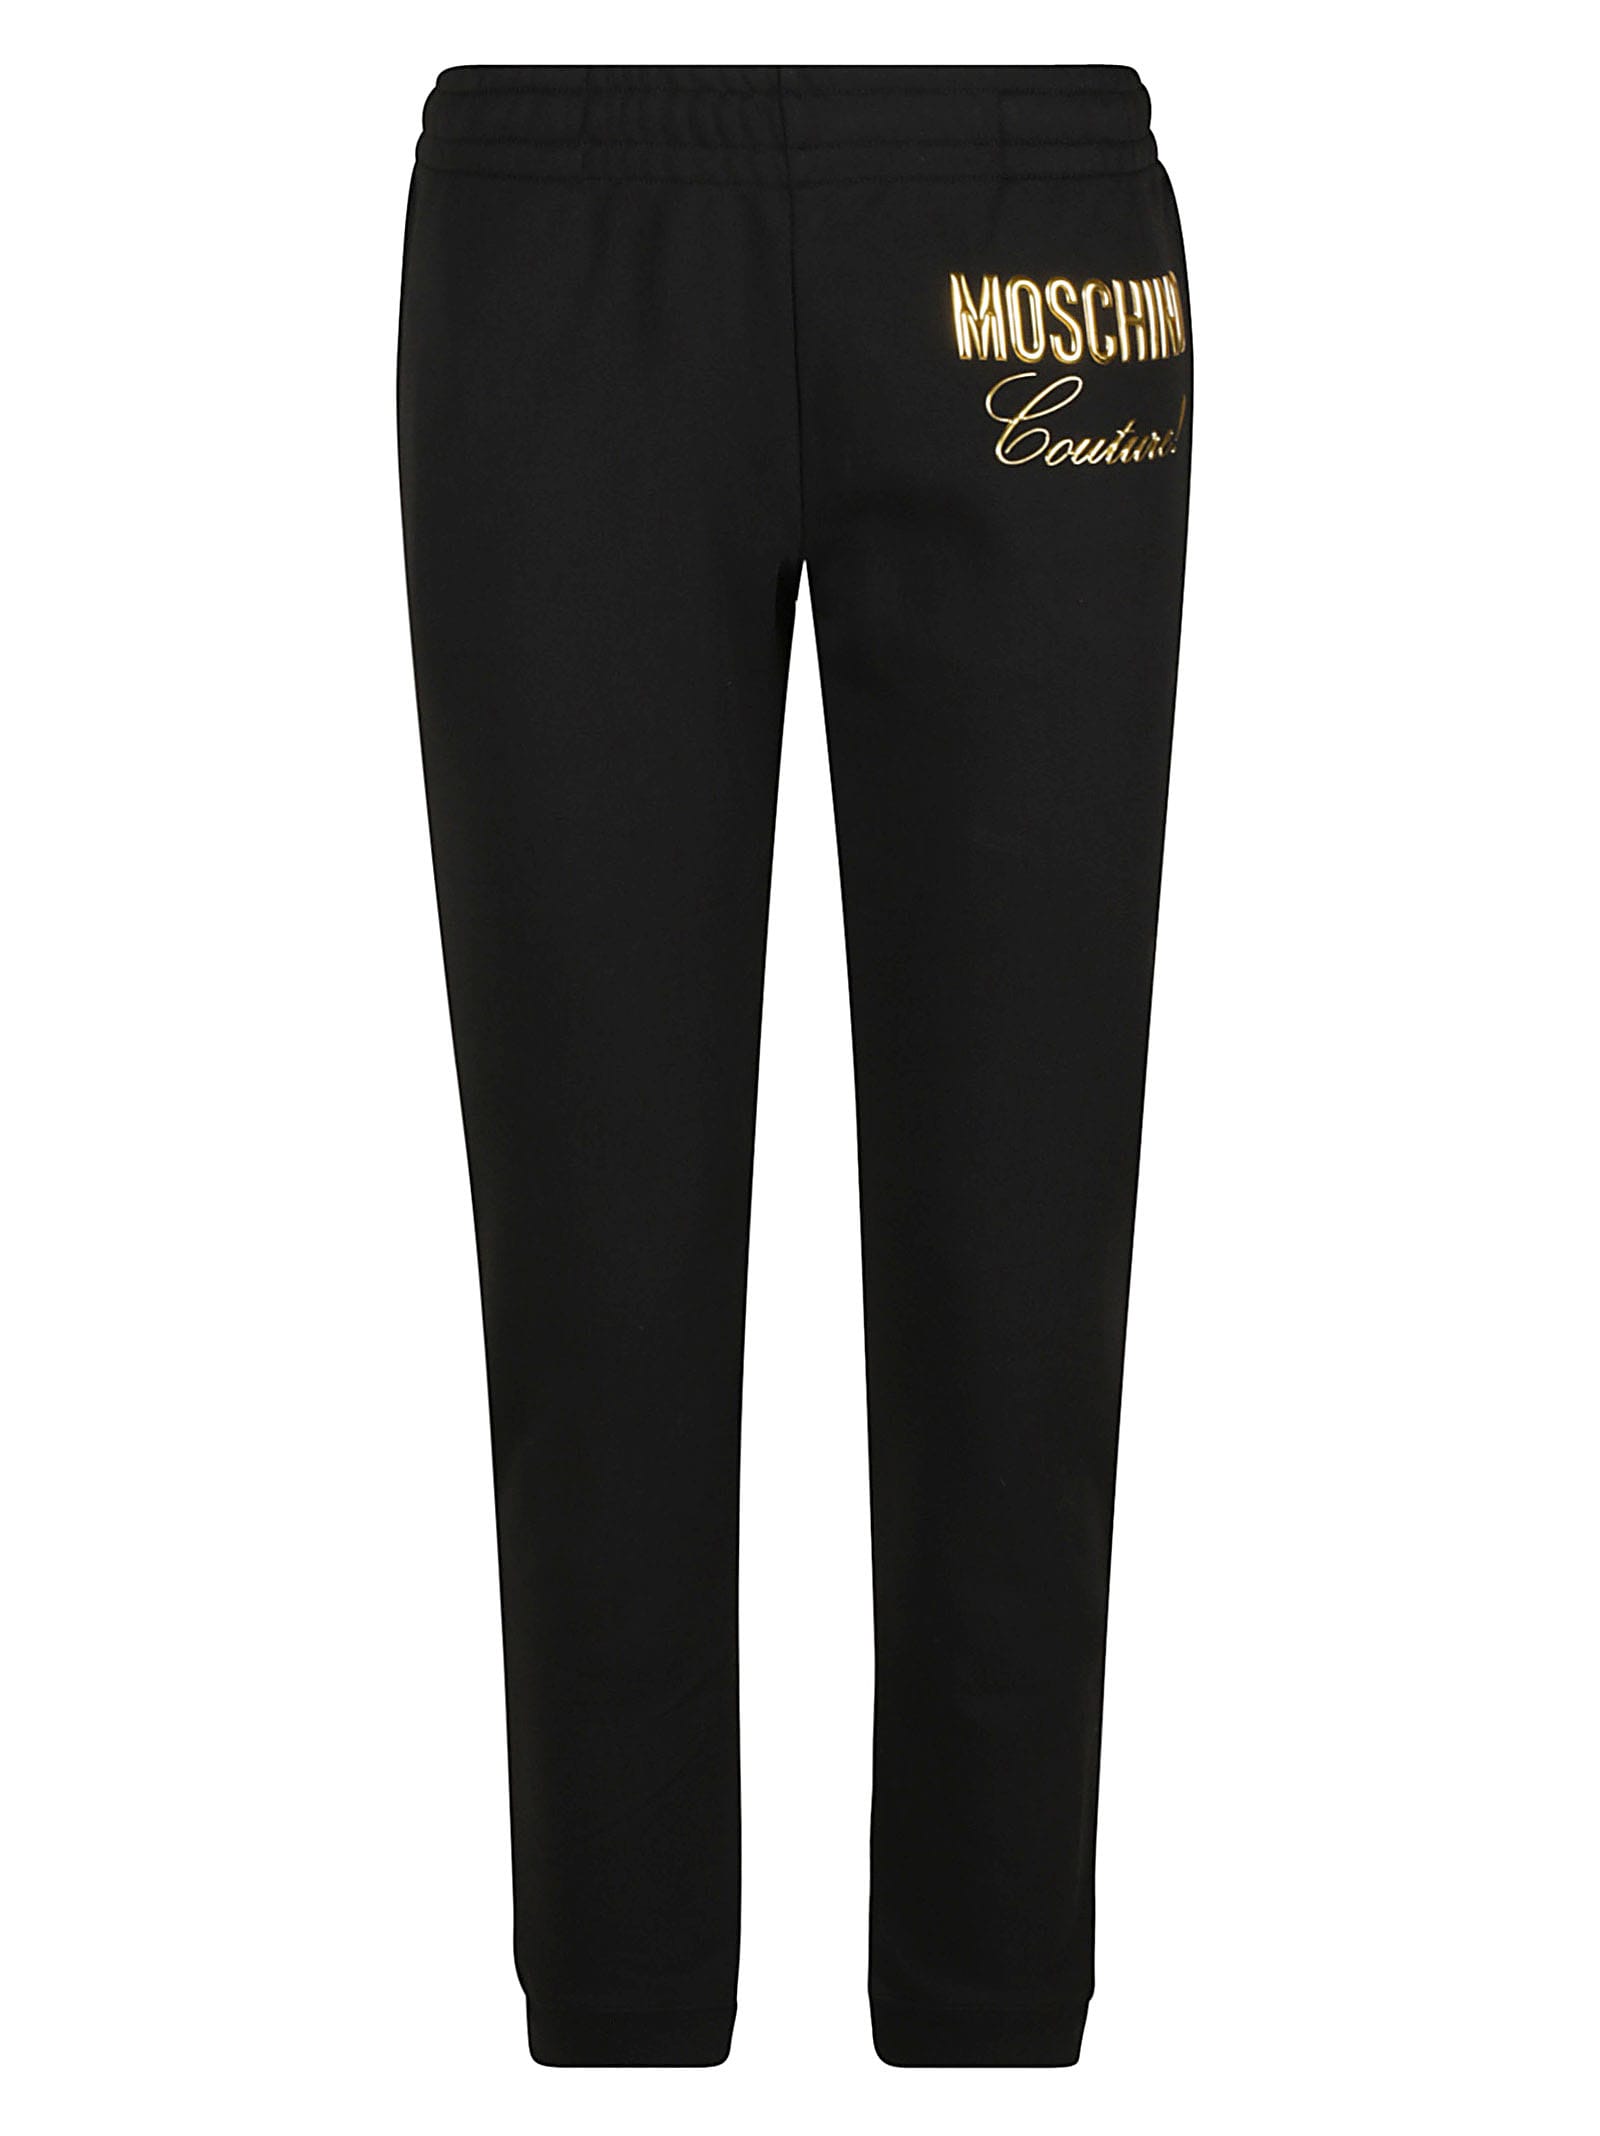 Moschino Couture Logo Track Pants